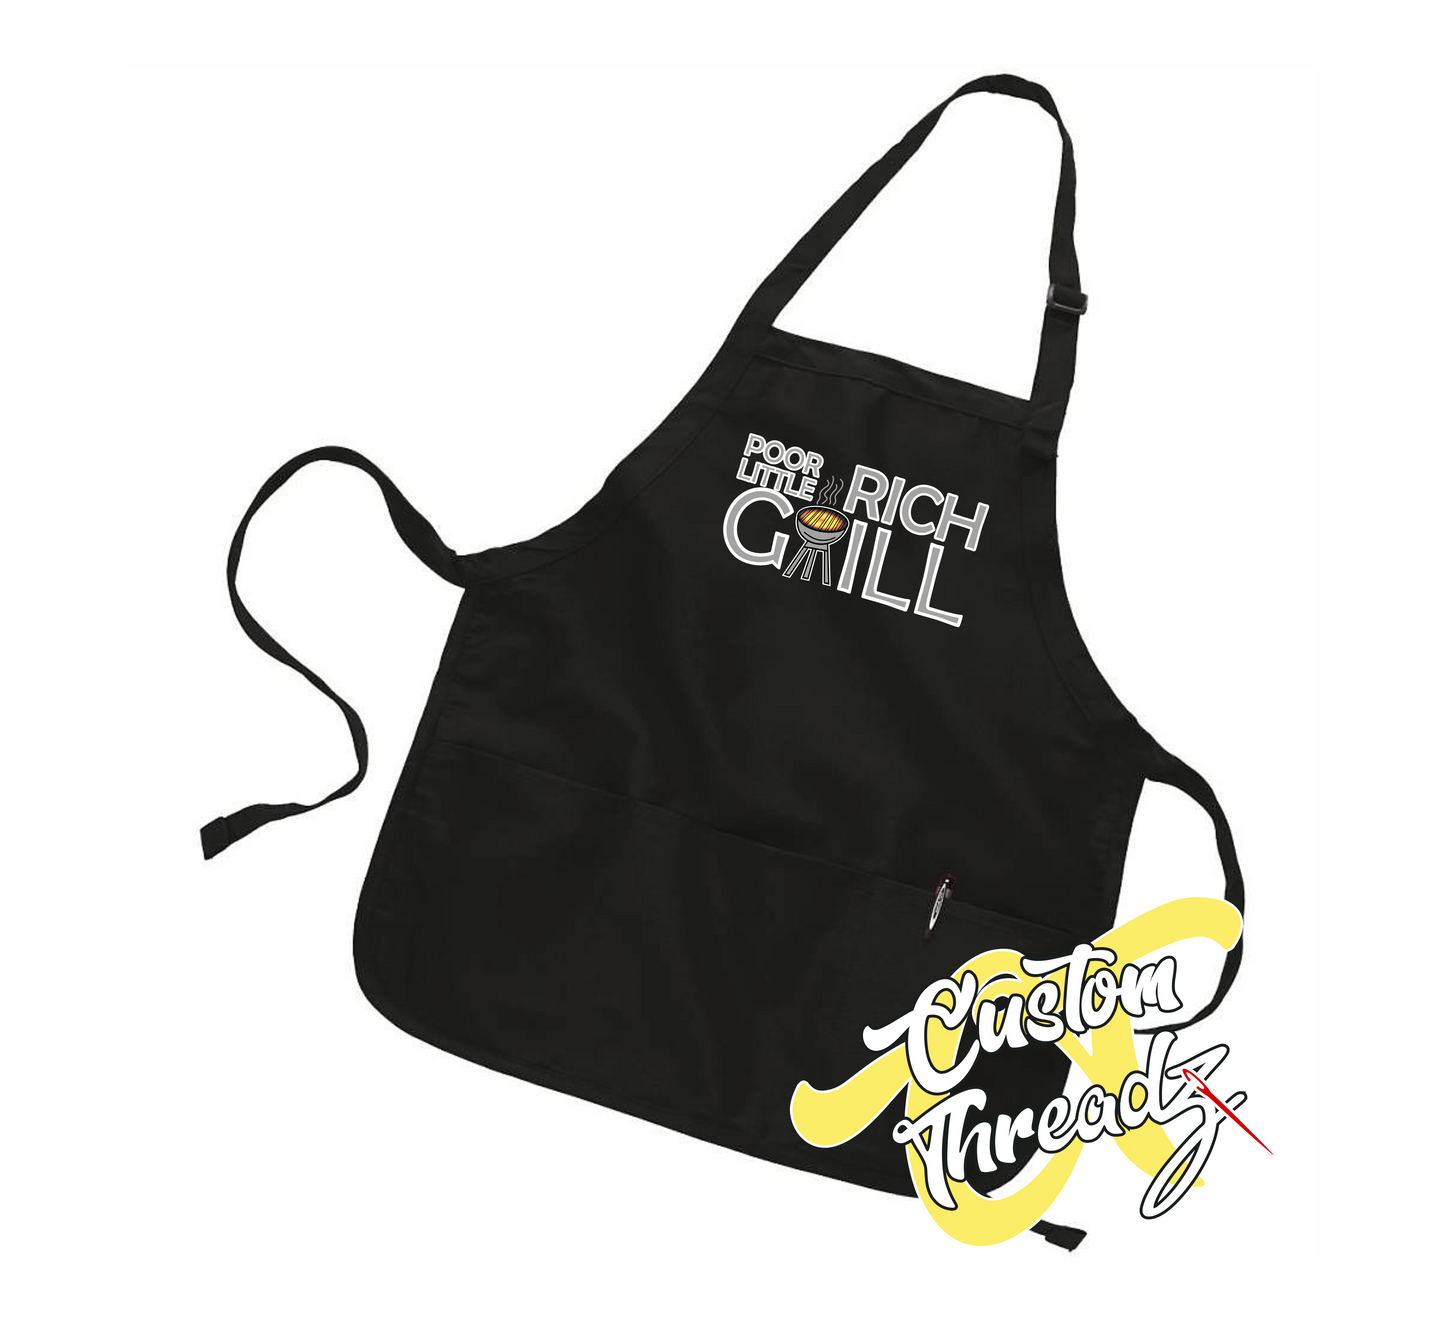 black apron with poor little rich grill schitts creek DTG printed design